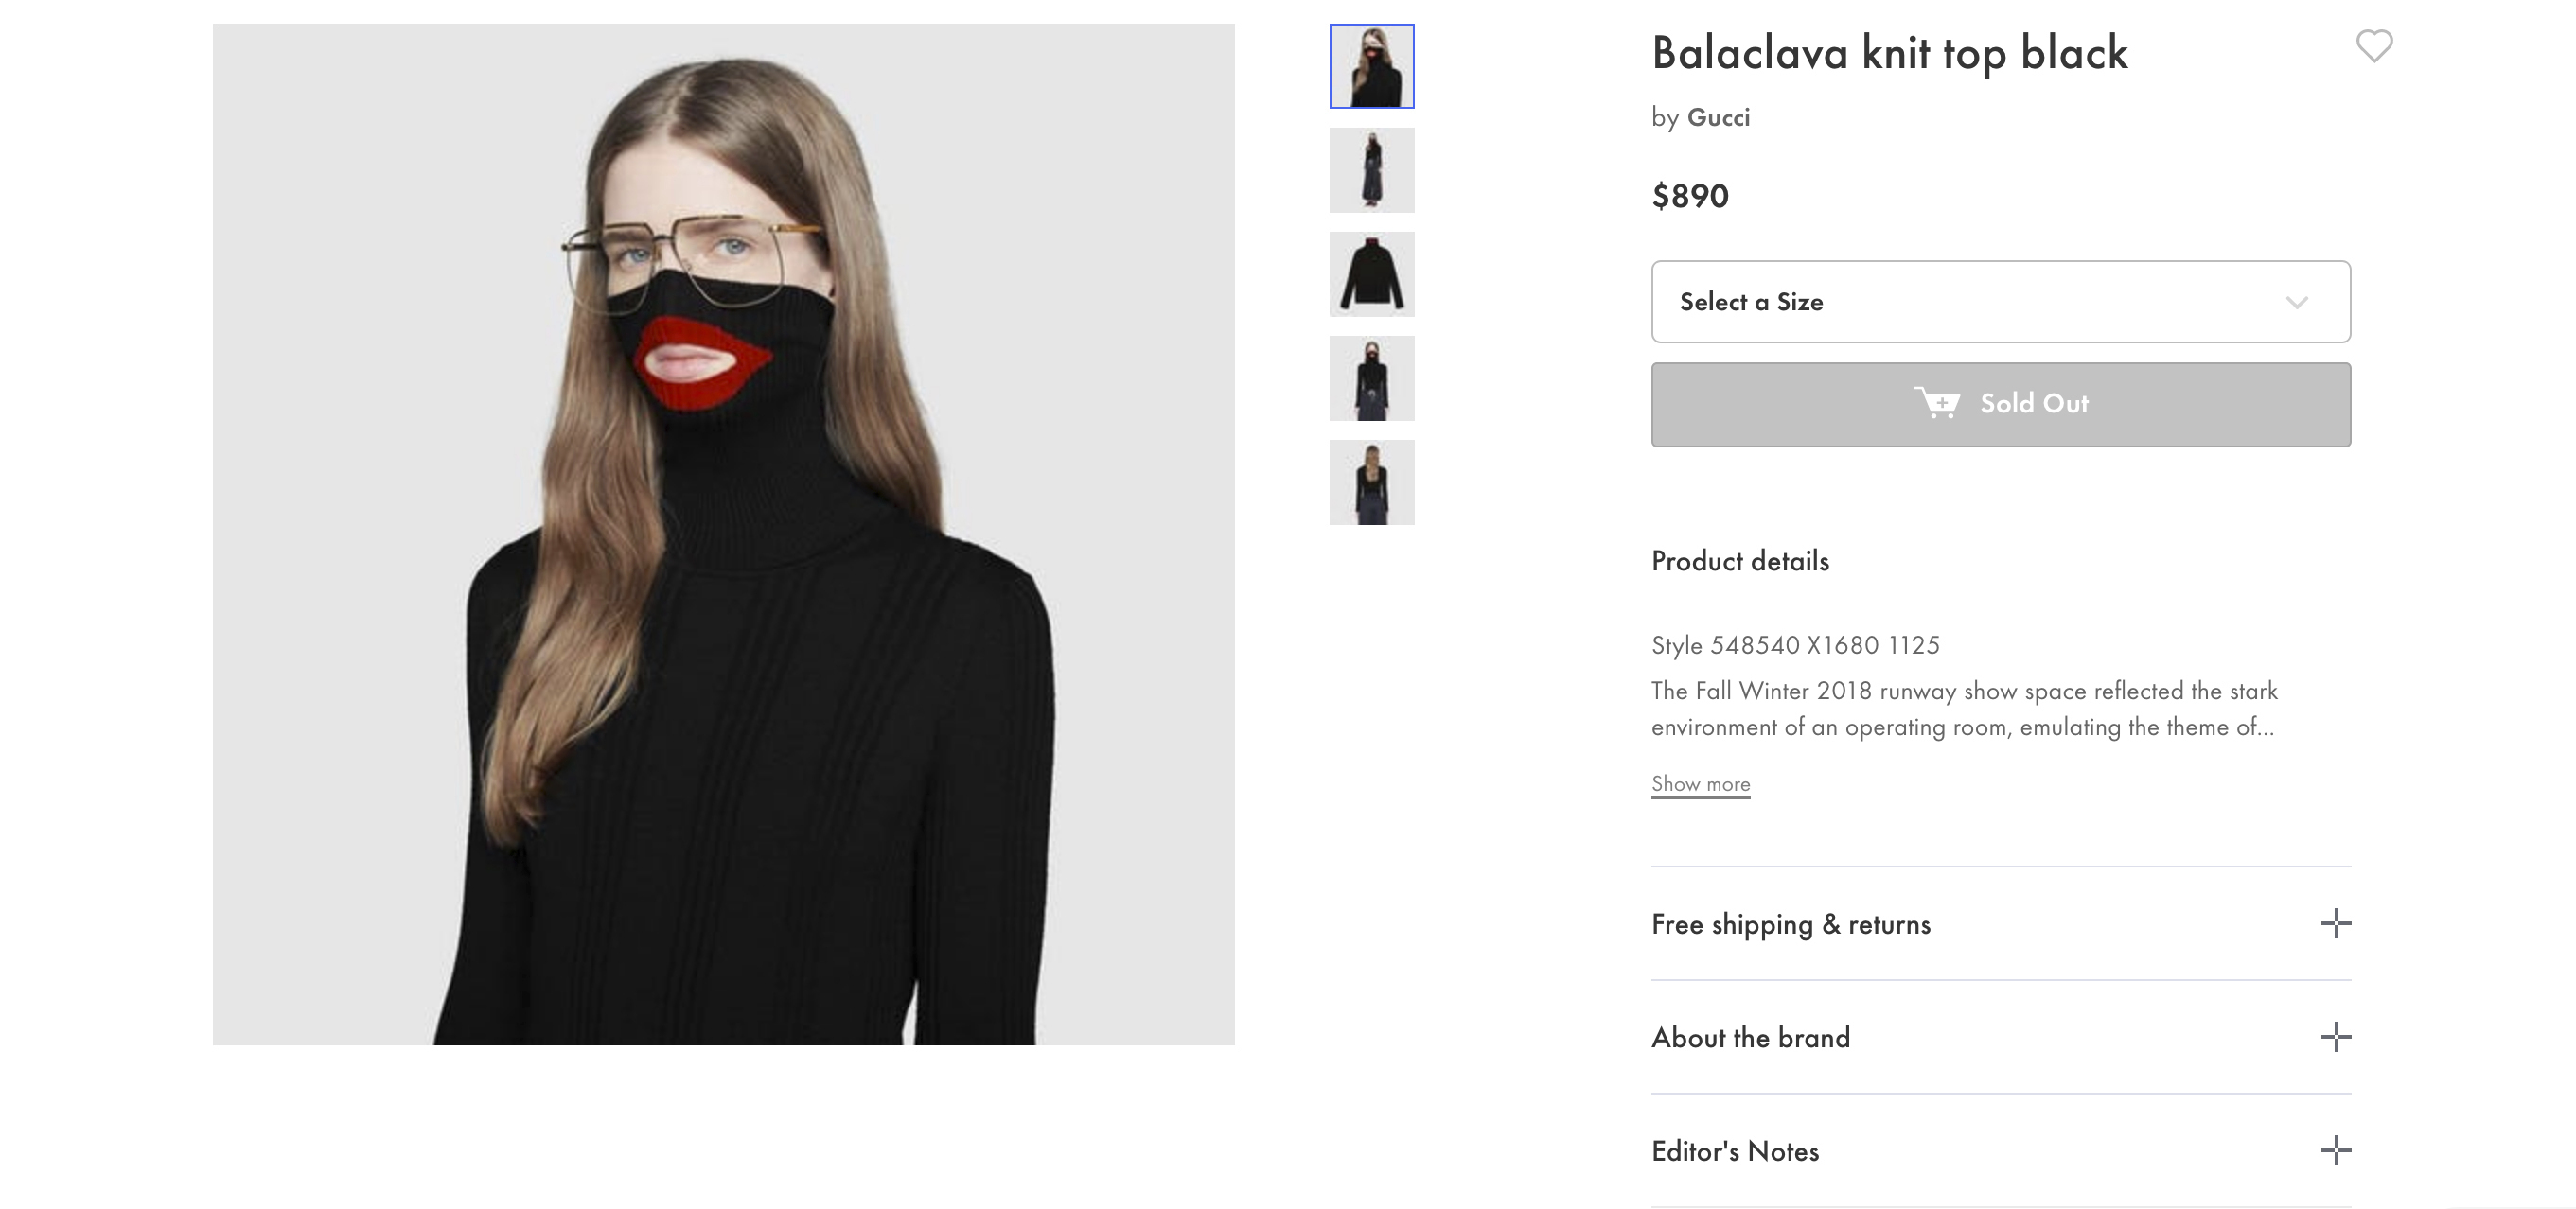 Gucci pulls out blackface sweater